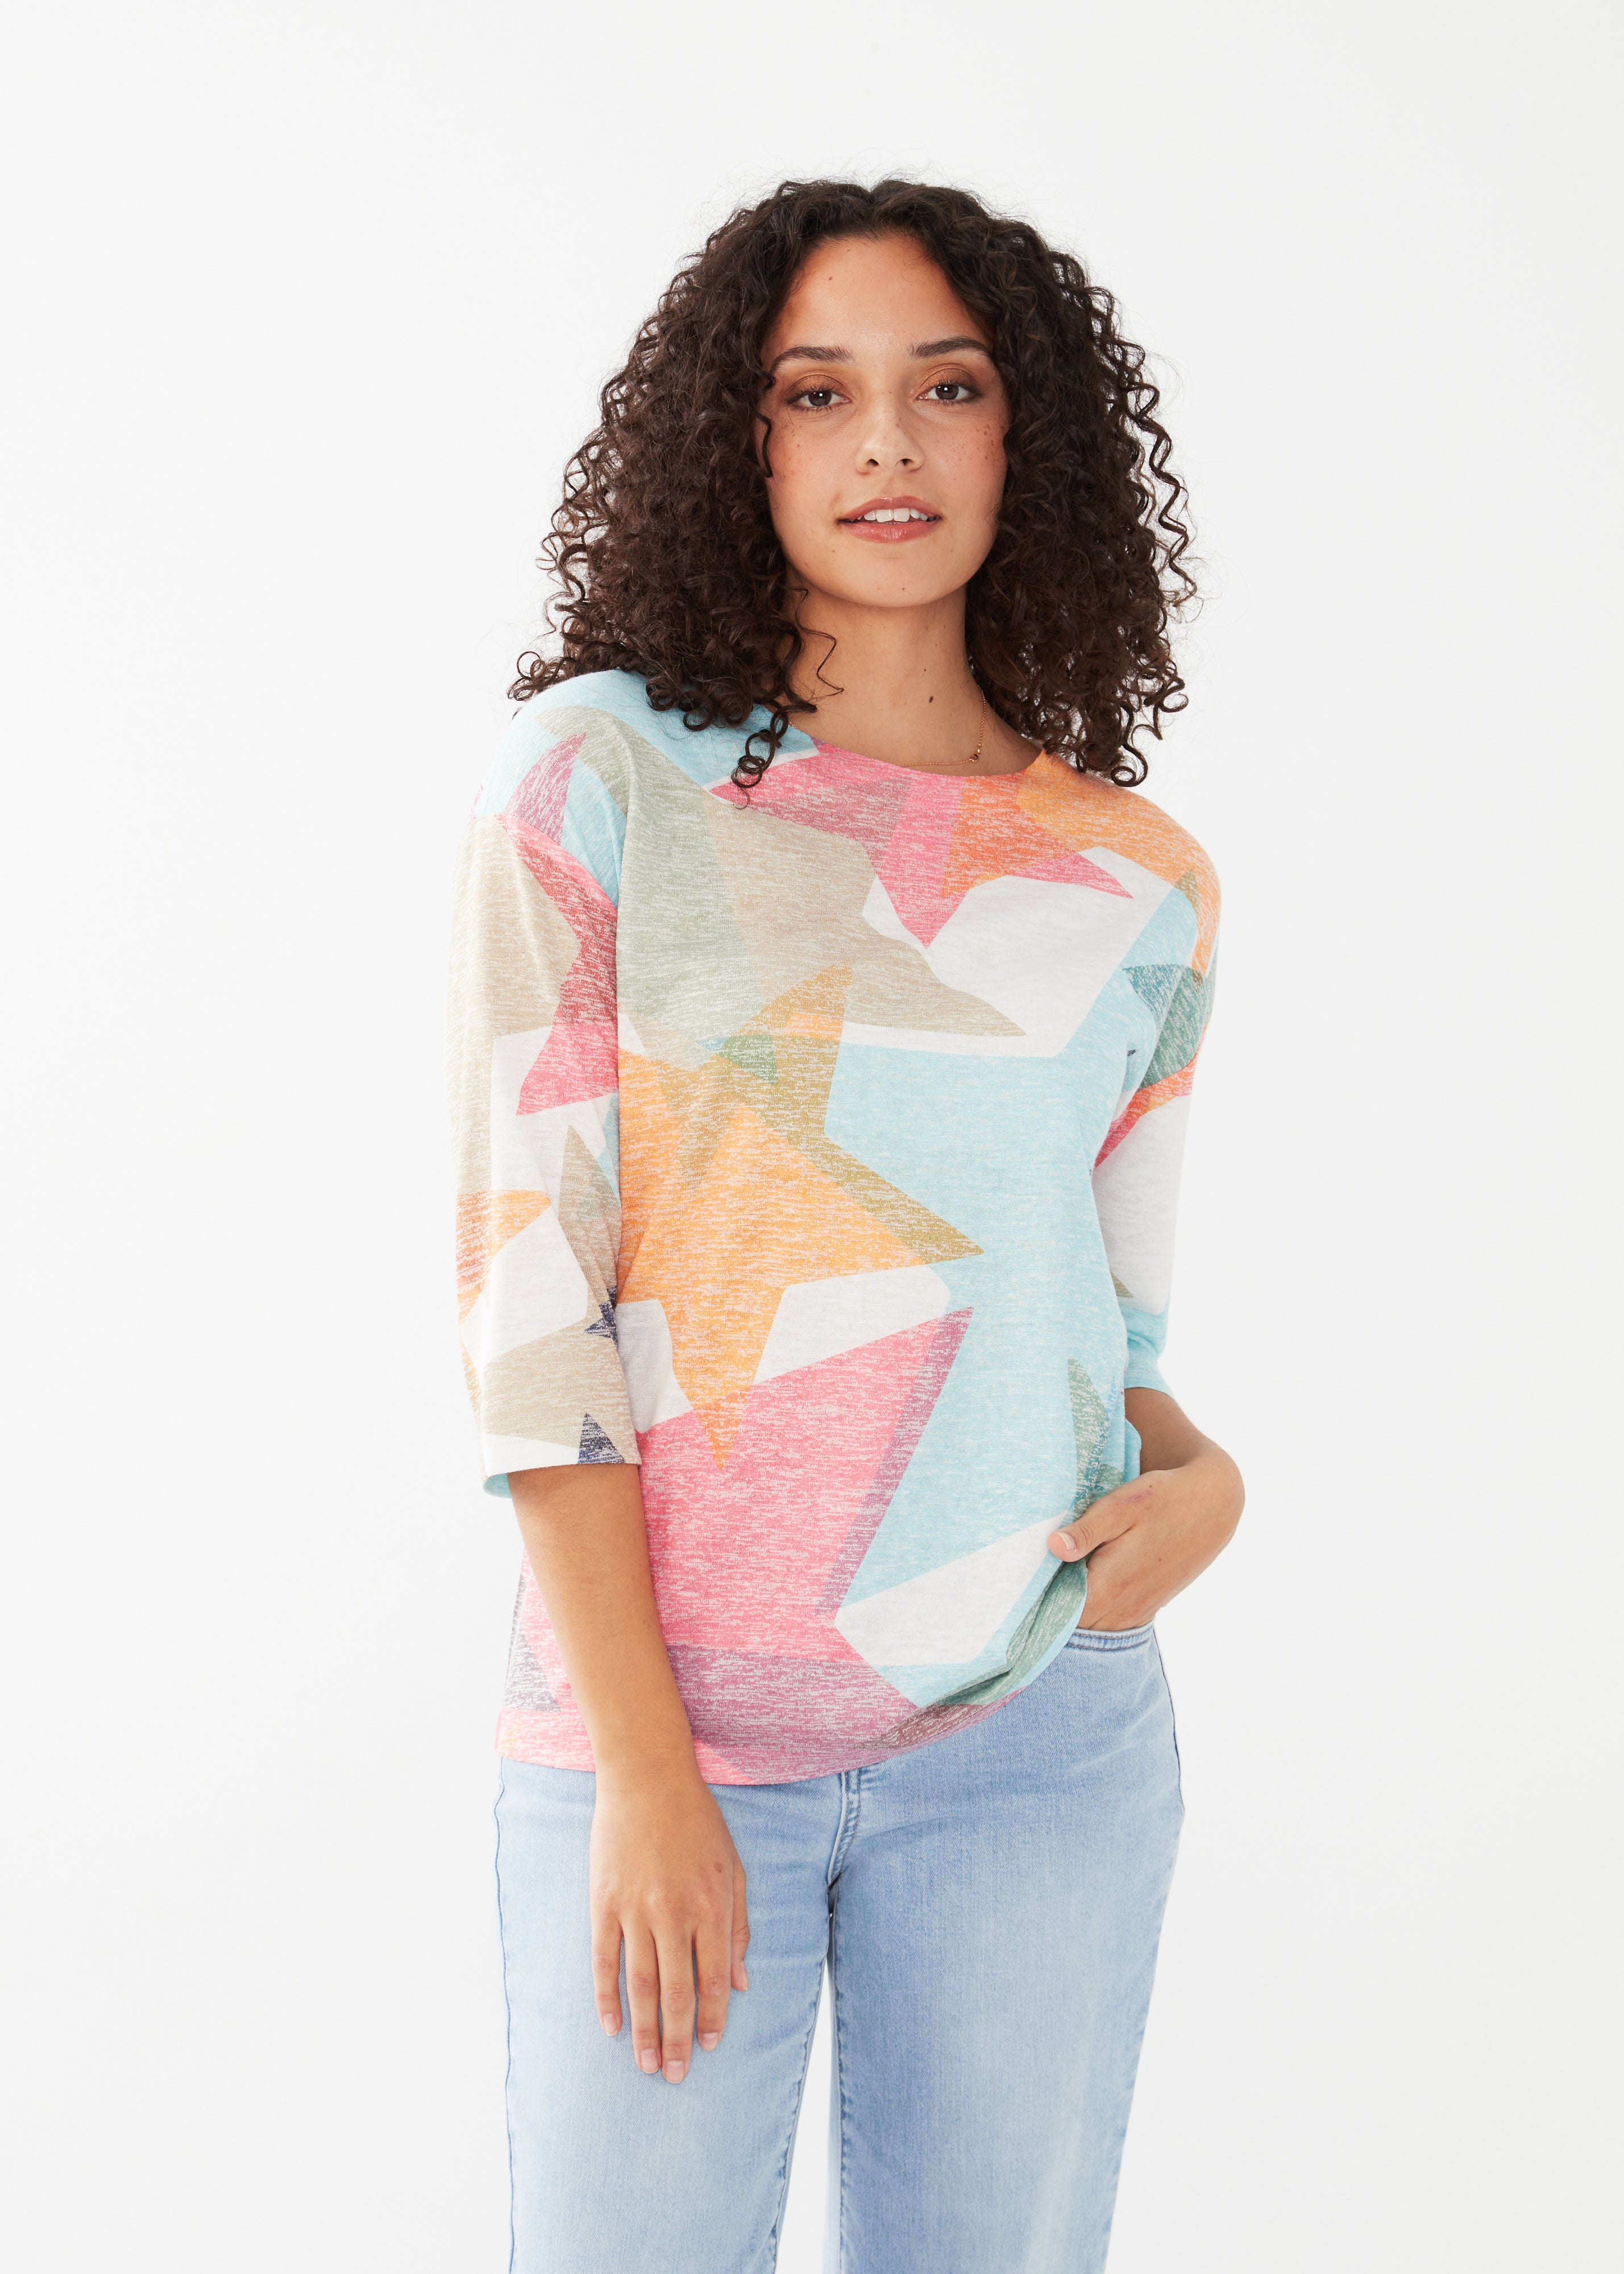 Spruce up your wardrobe with our FDJ 3/4 Sleeve Drop Shoulder Top featuring a playful star print in multiple colours. Stand out from the crowd and show off your unique style in this quirky and fun top. (You'll look like a star - pun intended!)